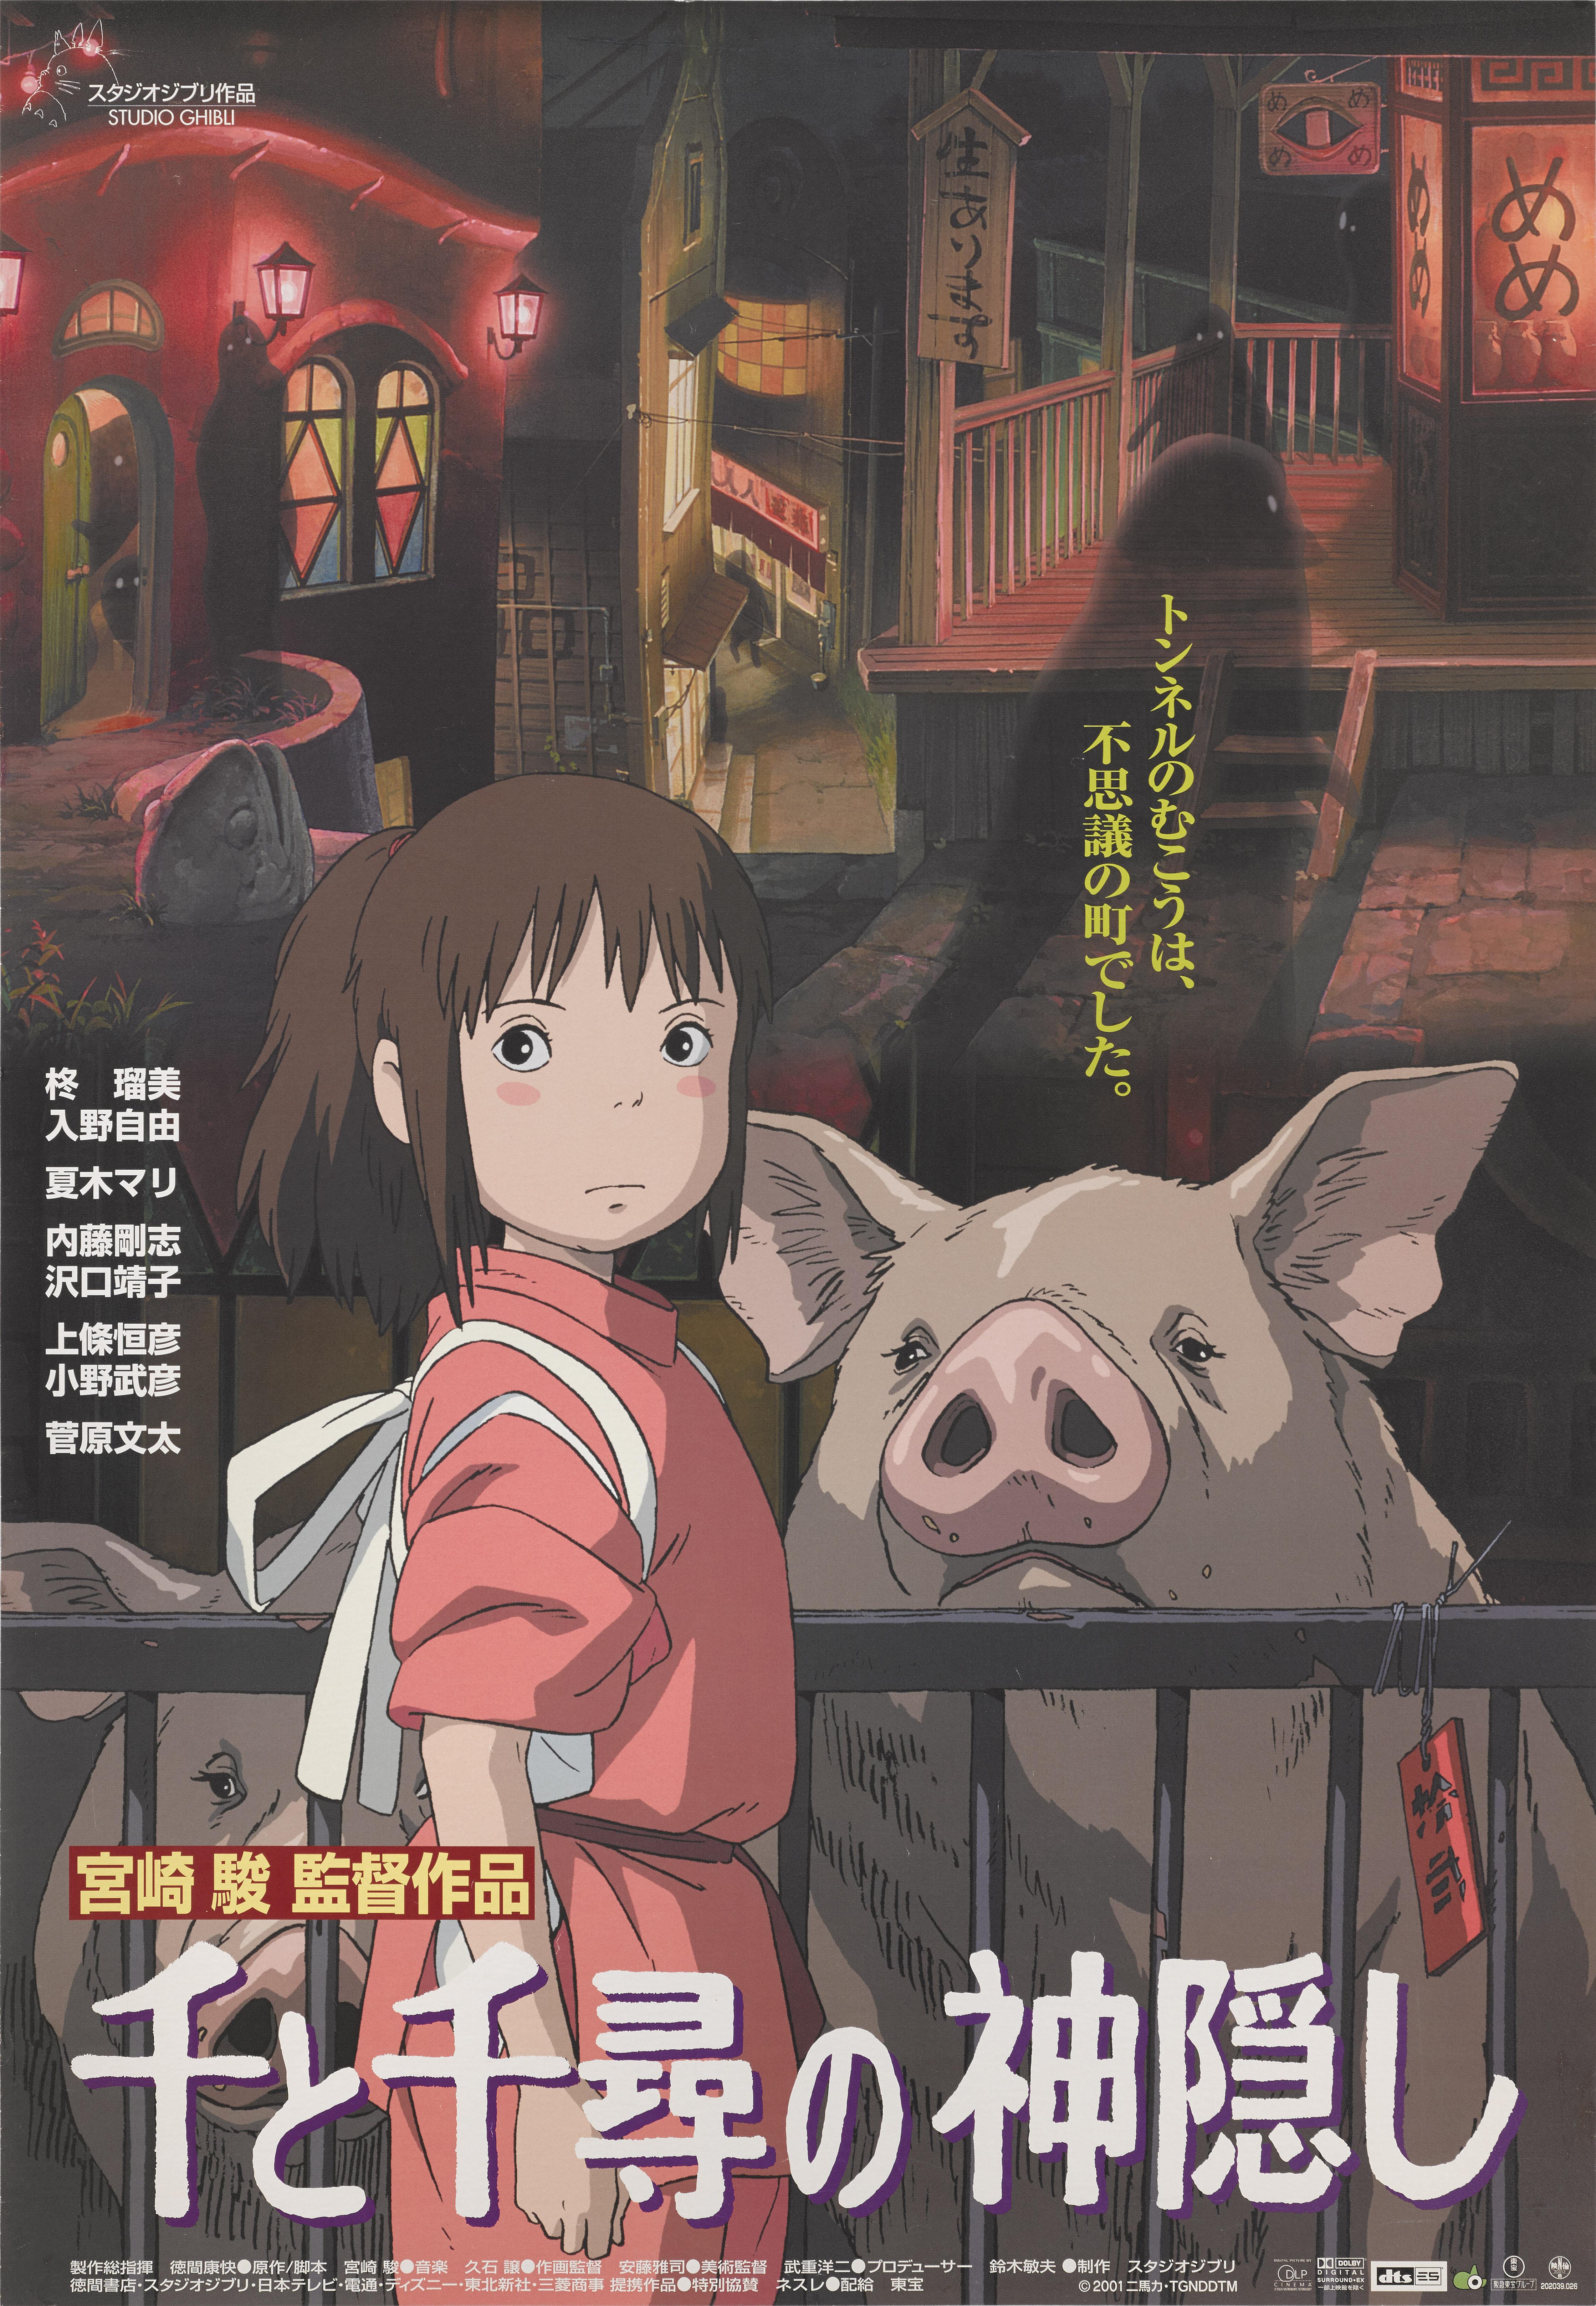 Original Japanese film poster for the 2001 Studio Ghibli animation.
This masterpiece of animation was directed by Hayao Miyazaki and won the 2002 Academy Award for Best Animated Feature Film.
This poster is unfolded and conservation linen backed